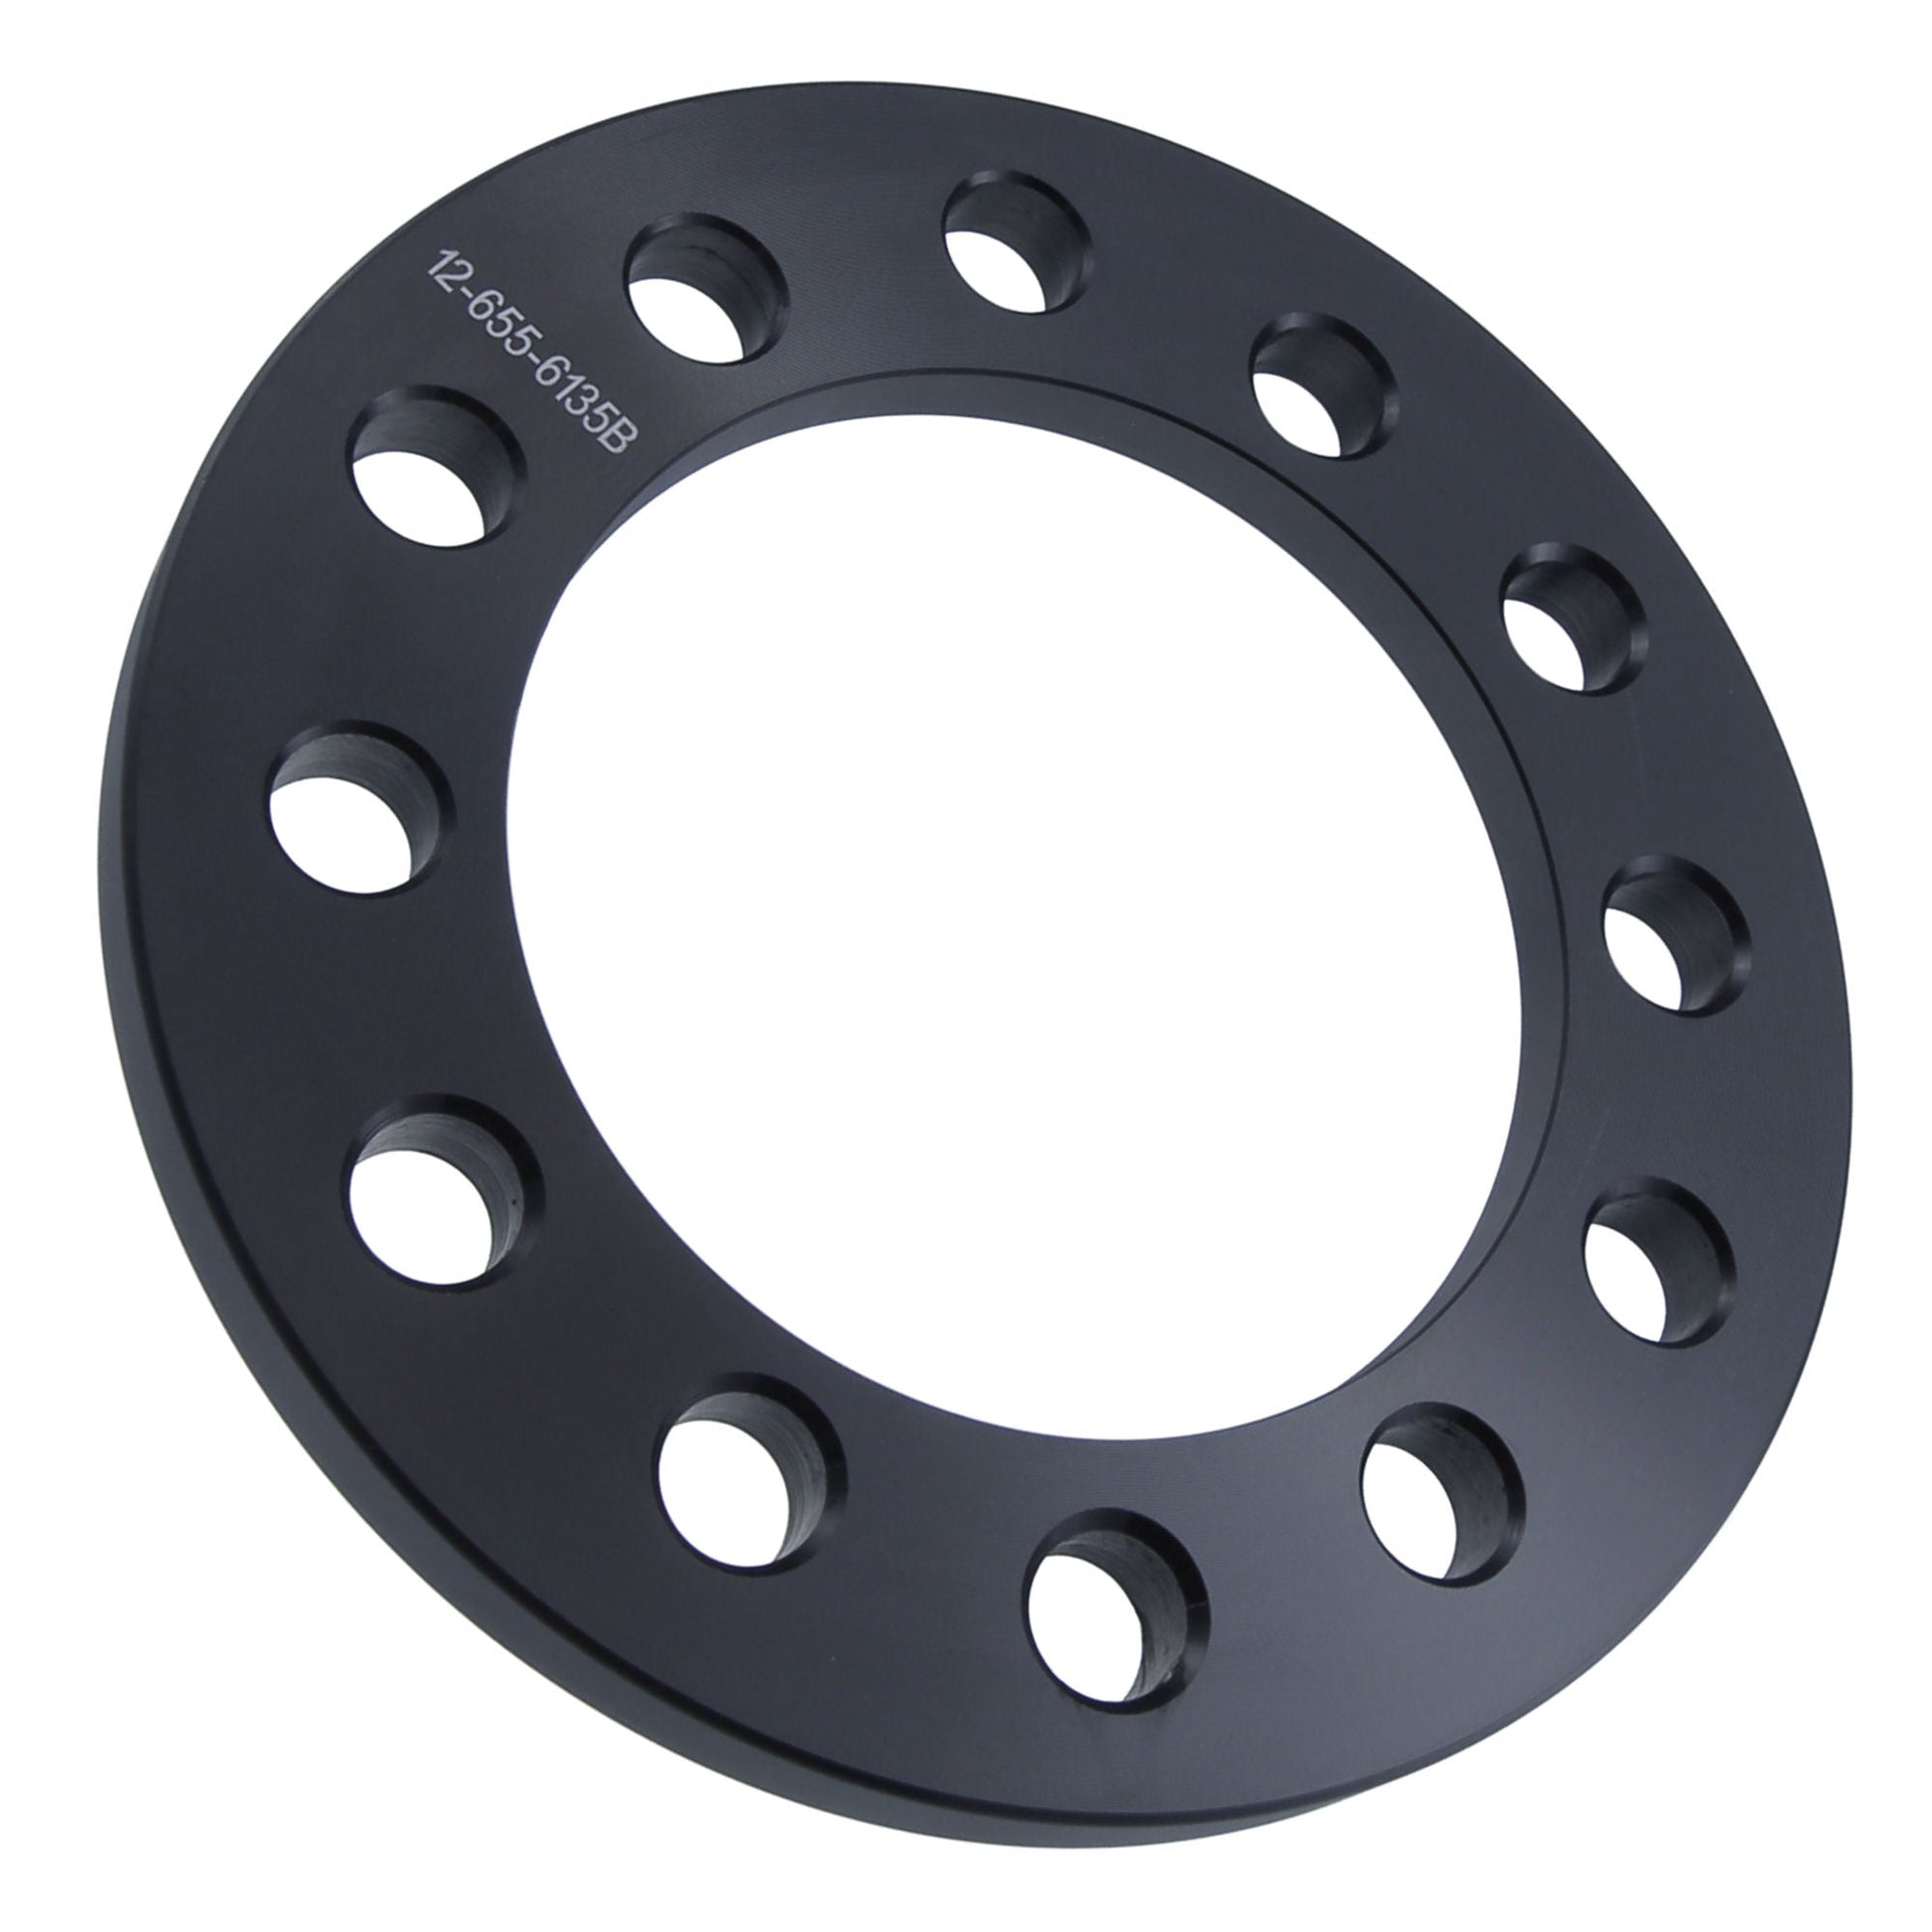 1/2" Titan Wheel Spacers for Ford F-150 Expedition Raptor | 6x135 | Titan Wheel Accessories